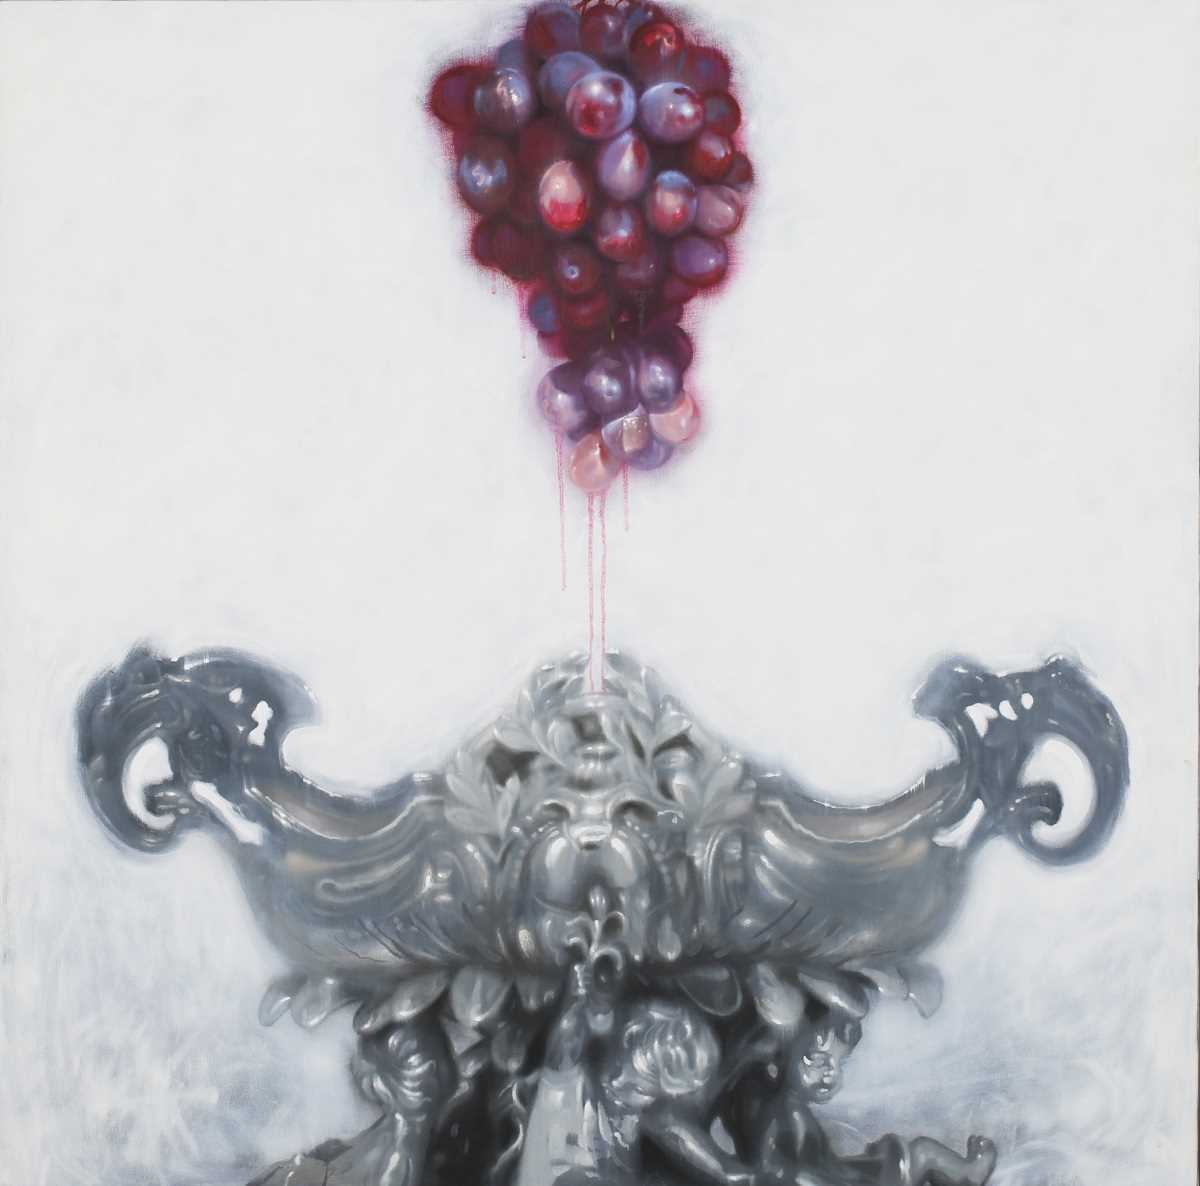 Chris Kettle – ‘Attacco’ (Still Life with Grapes and Silverware), oil on canvas, signed and dated